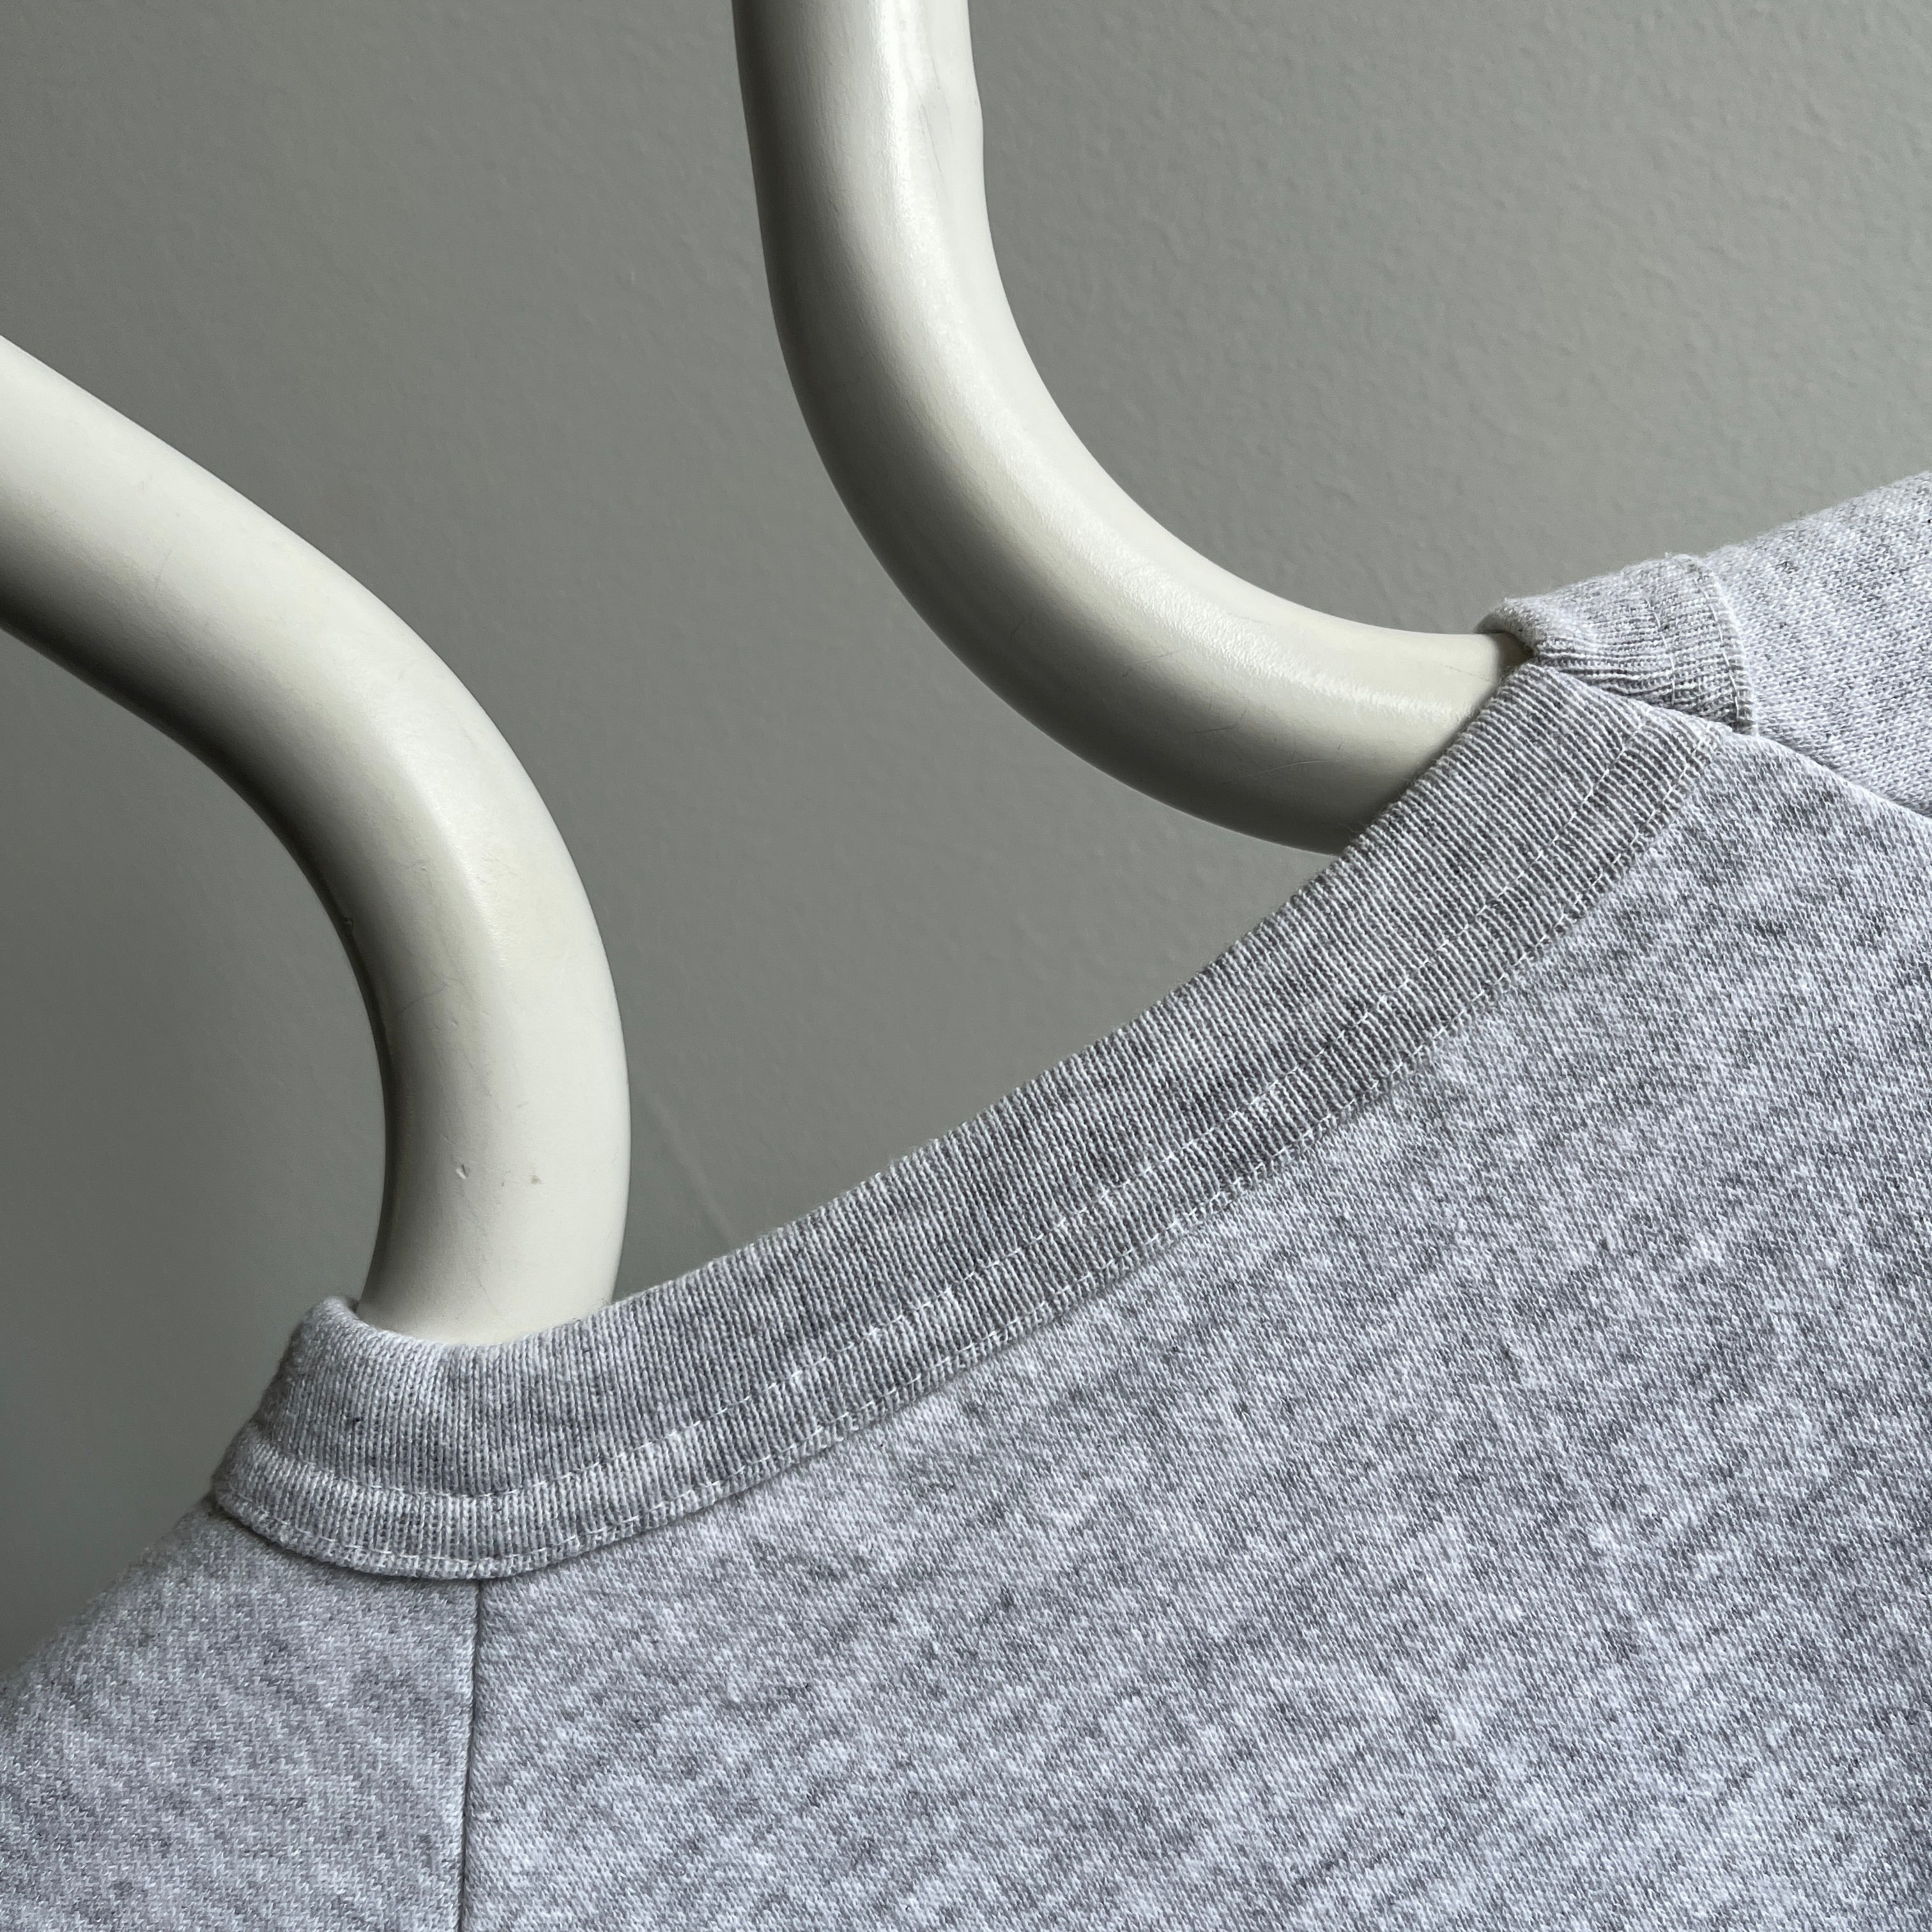 1980s Structured Light Gray Warm Up